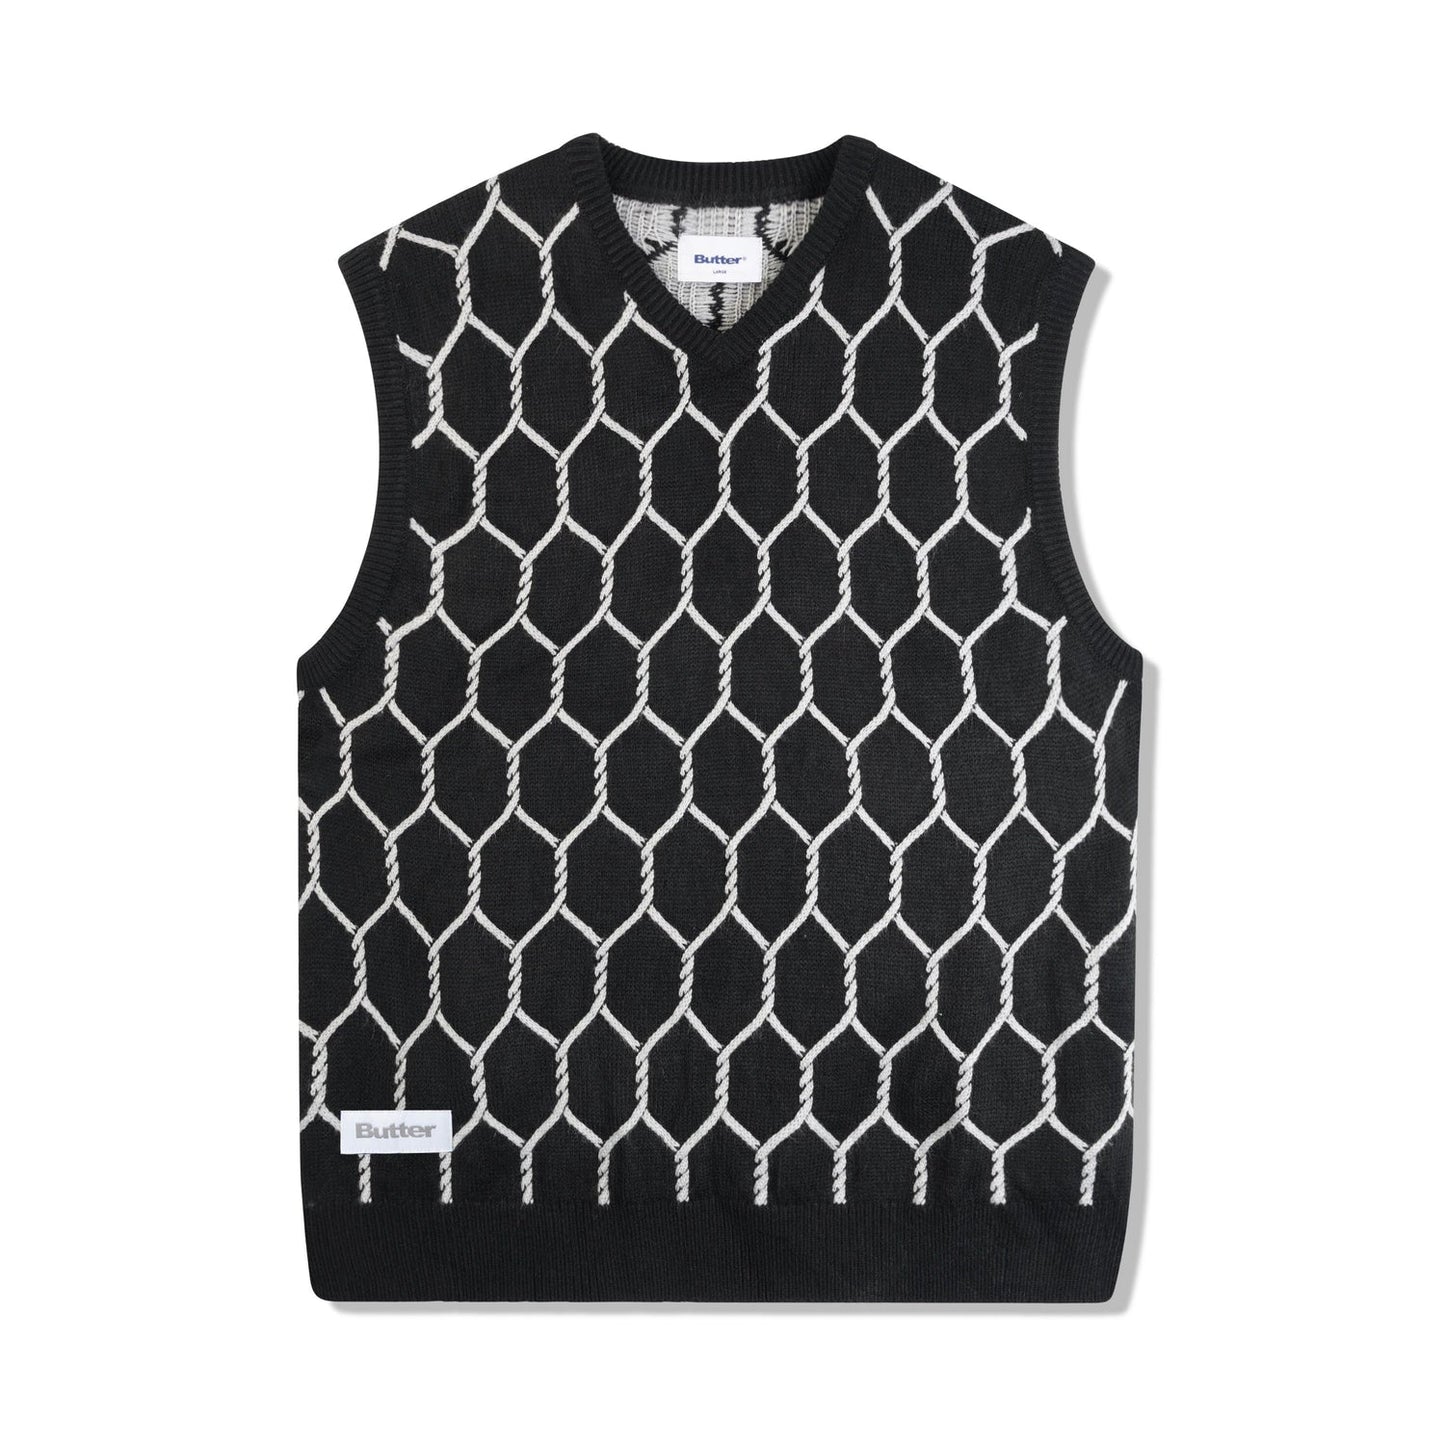 Chain Link Knitted Vest - Black